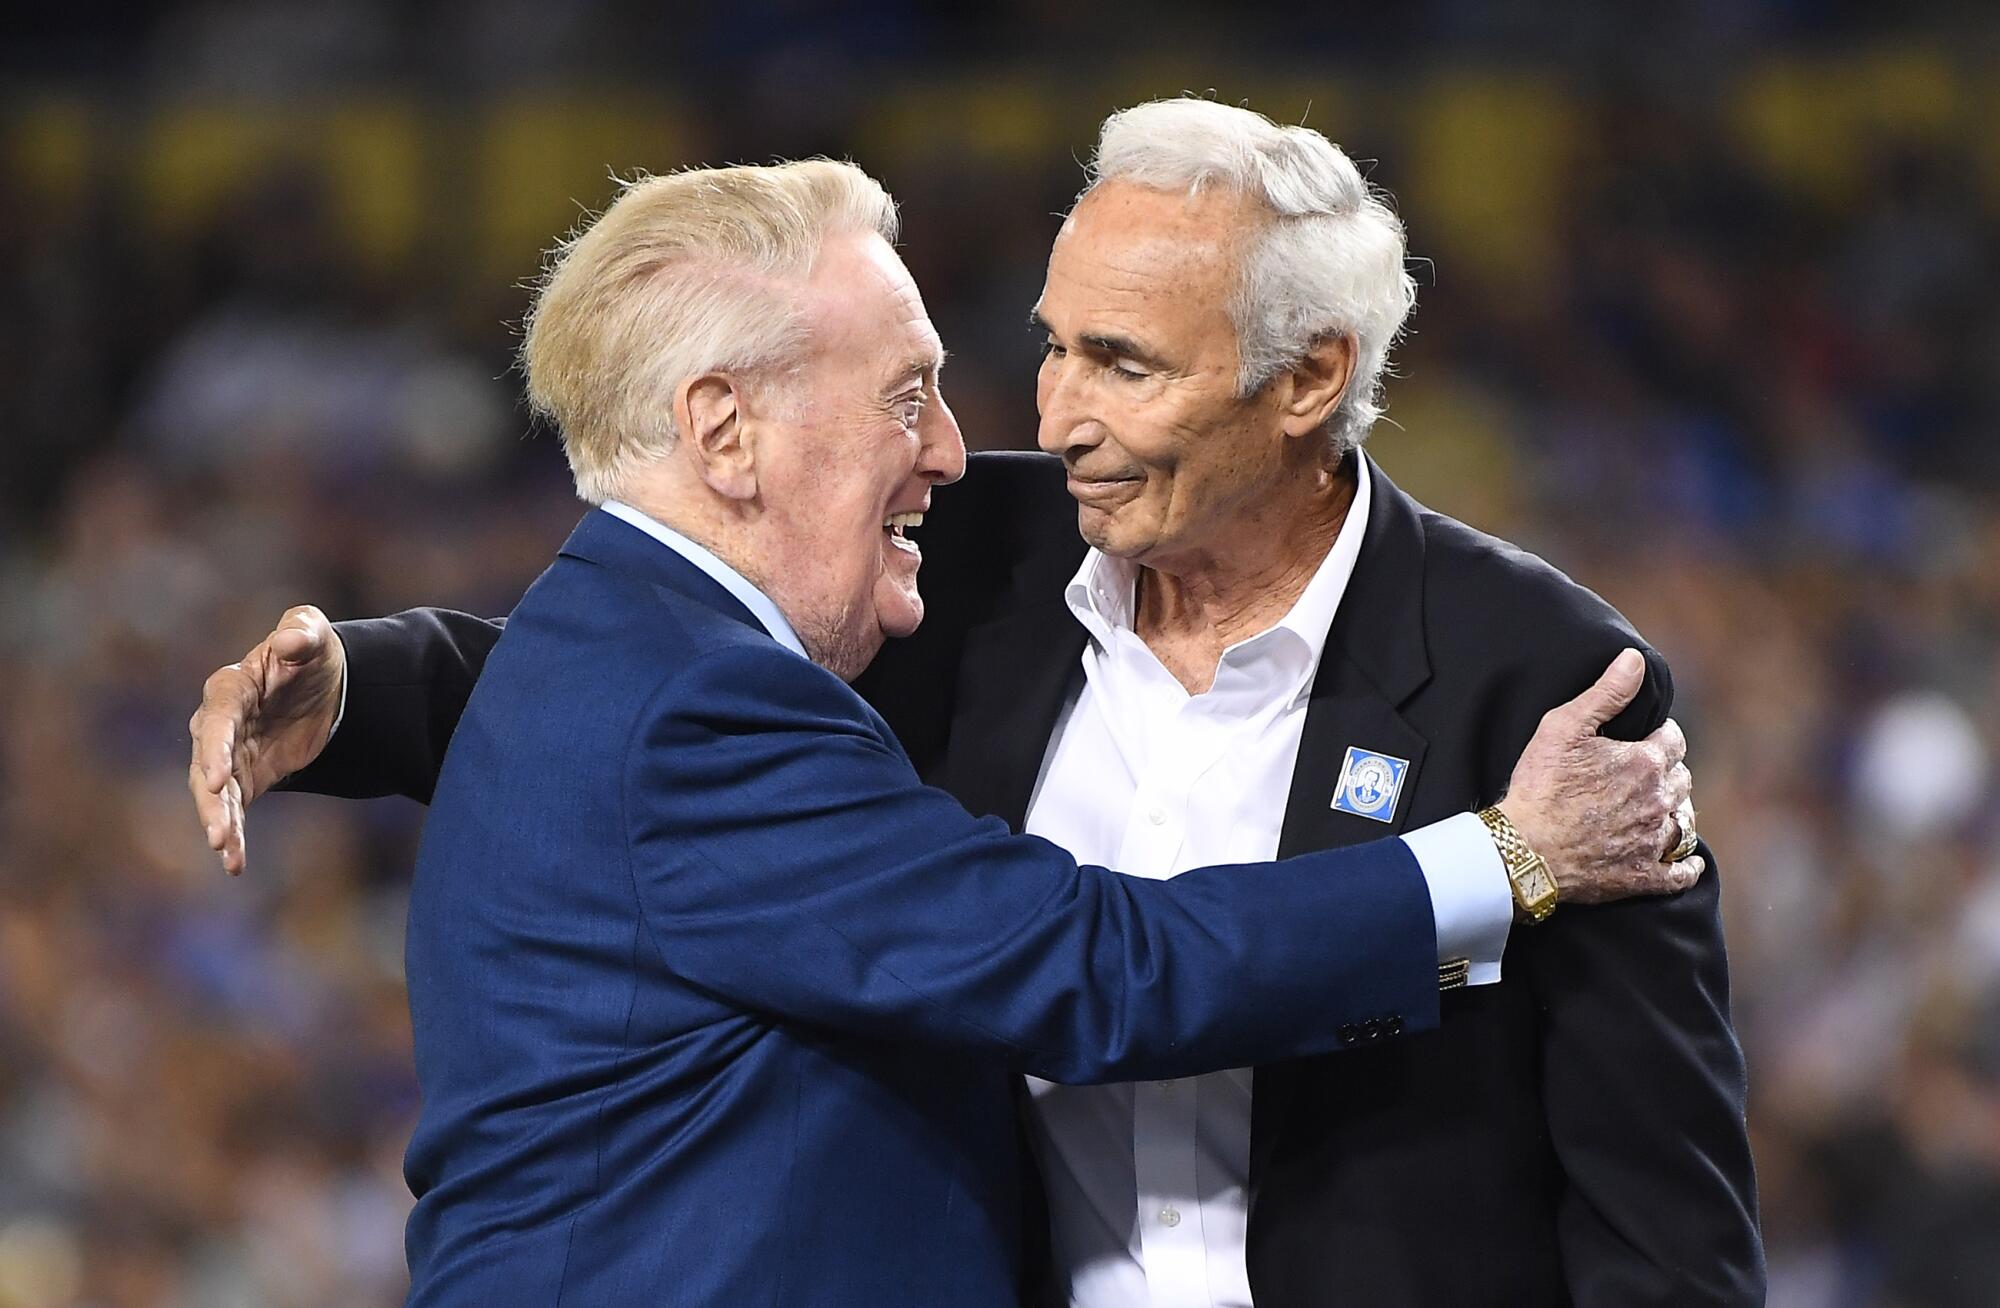 Dodgers announcer Vin Scully and former pitcher Sandy Koufax hug.